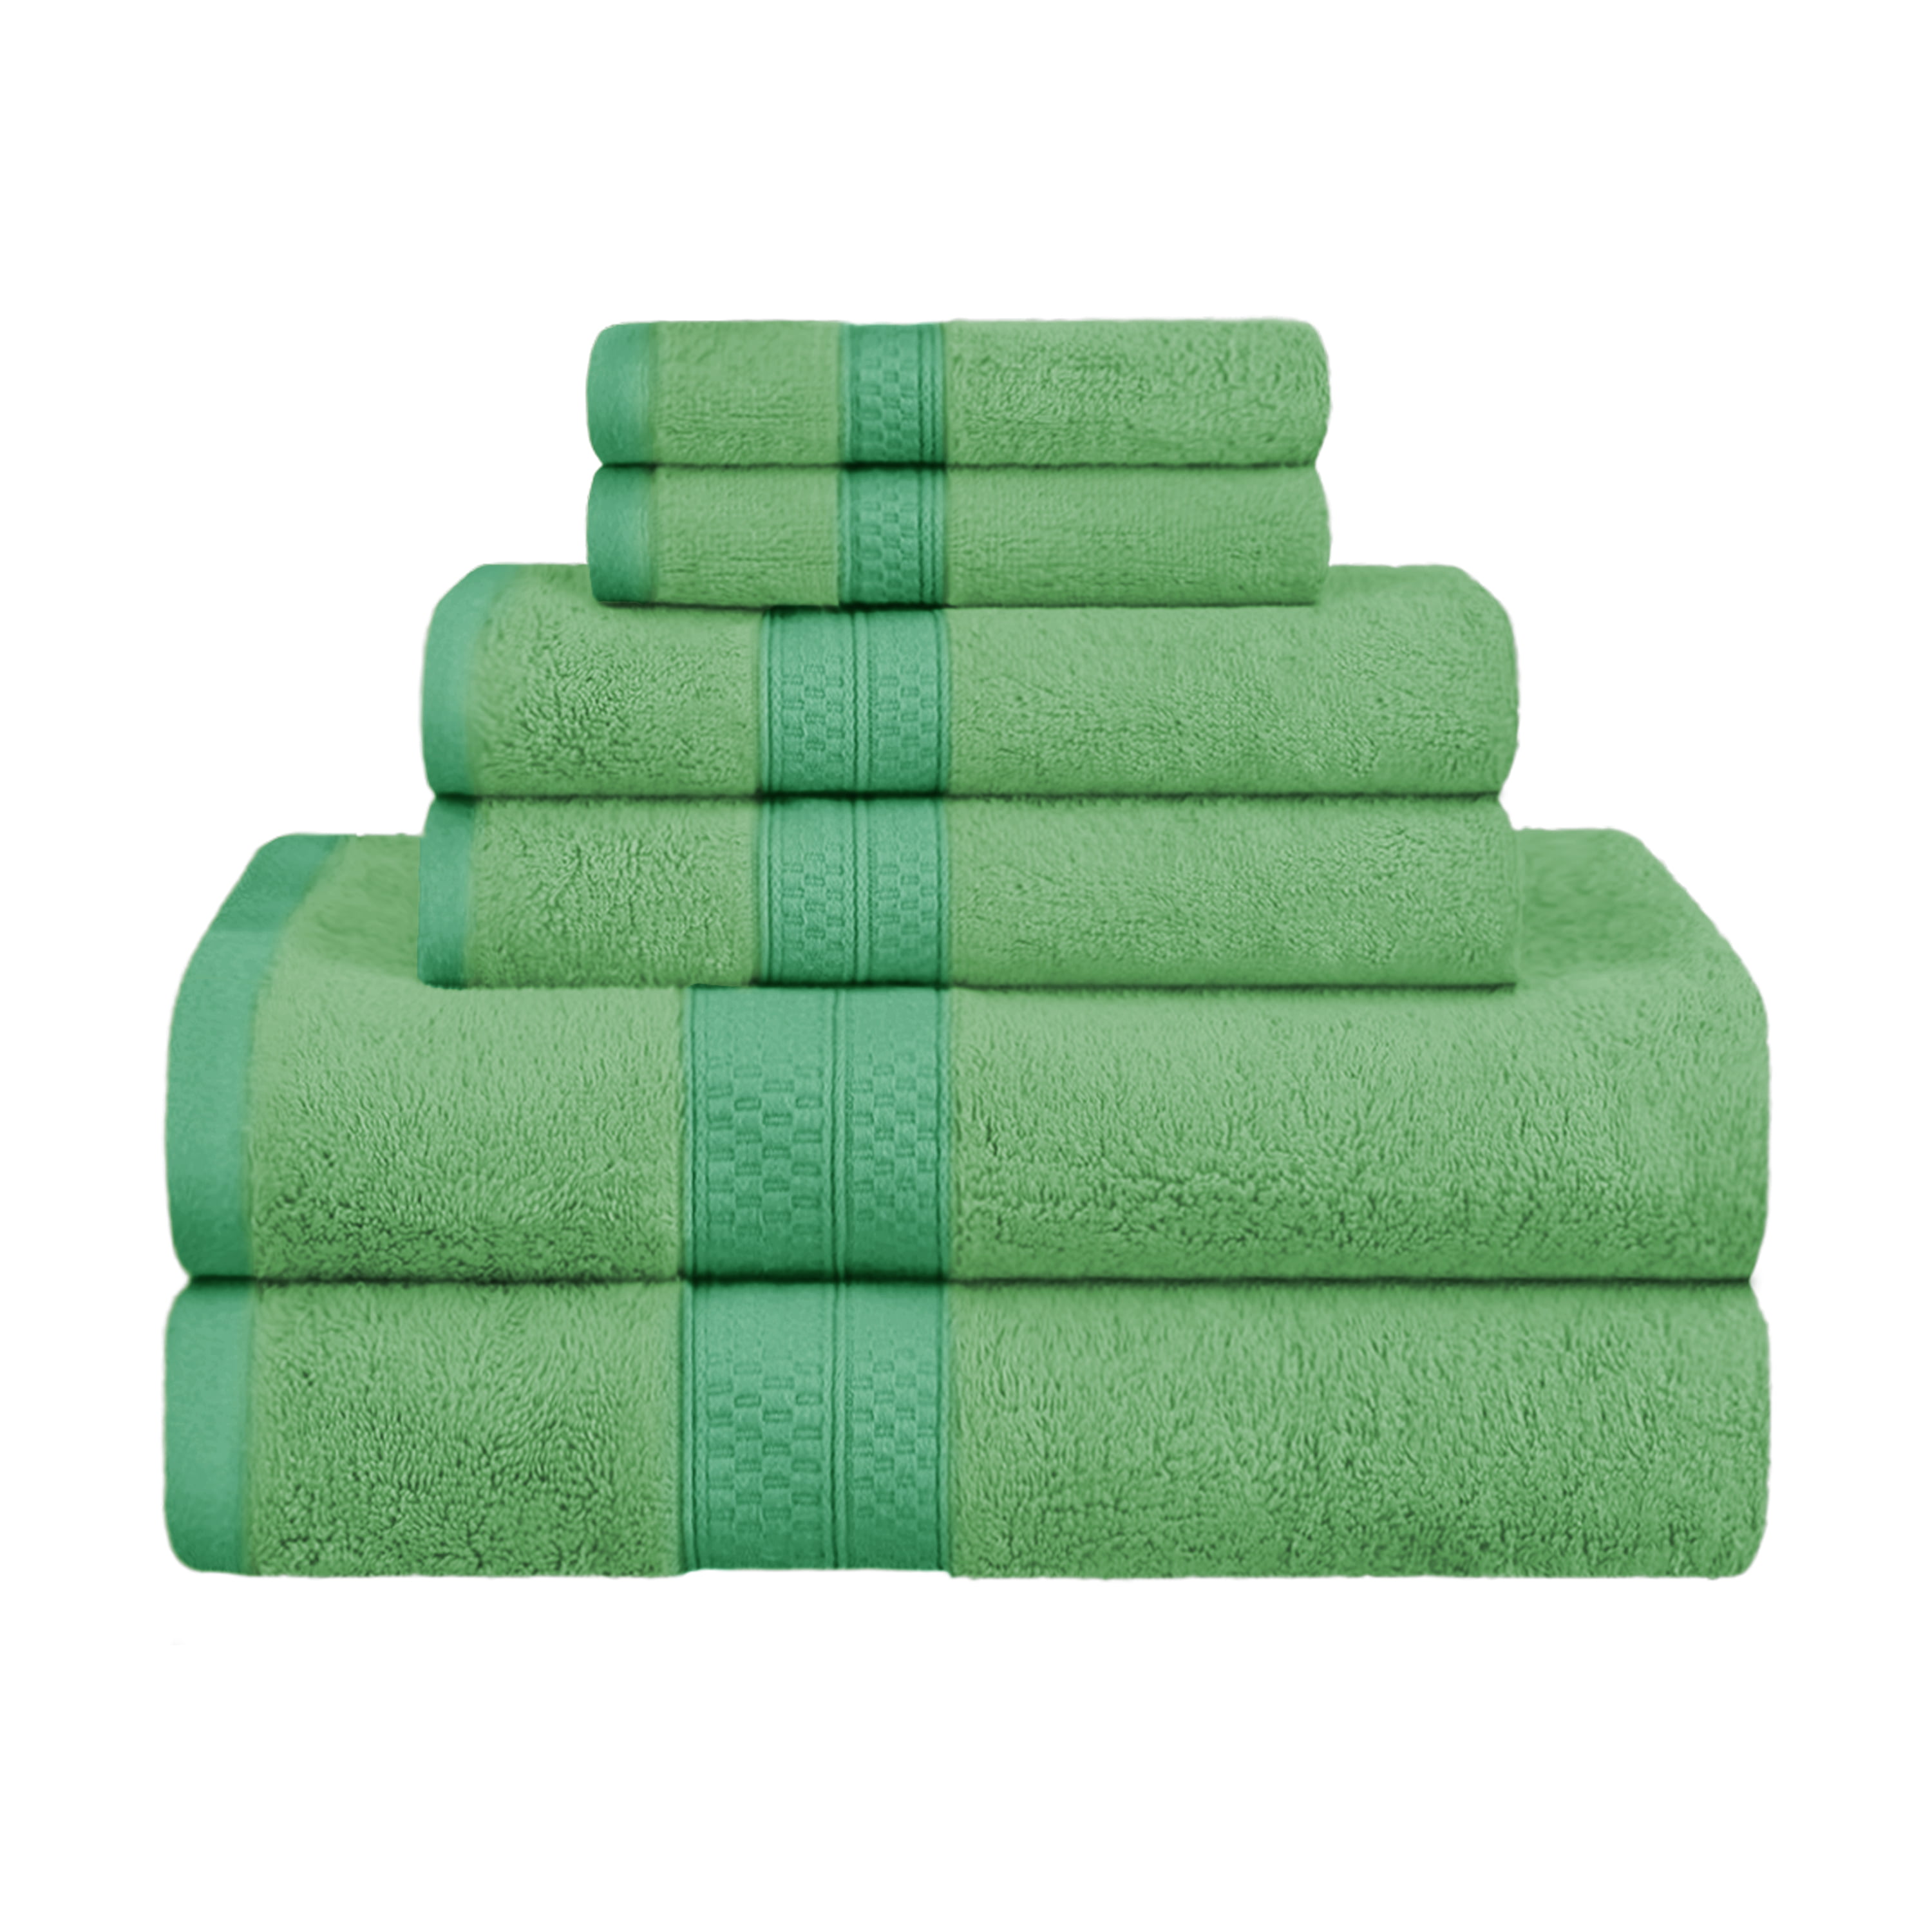 Green Color Details about   MUJI Compact Bath Towel 100% Cotton Shrink Wrap Travel *NEW* 